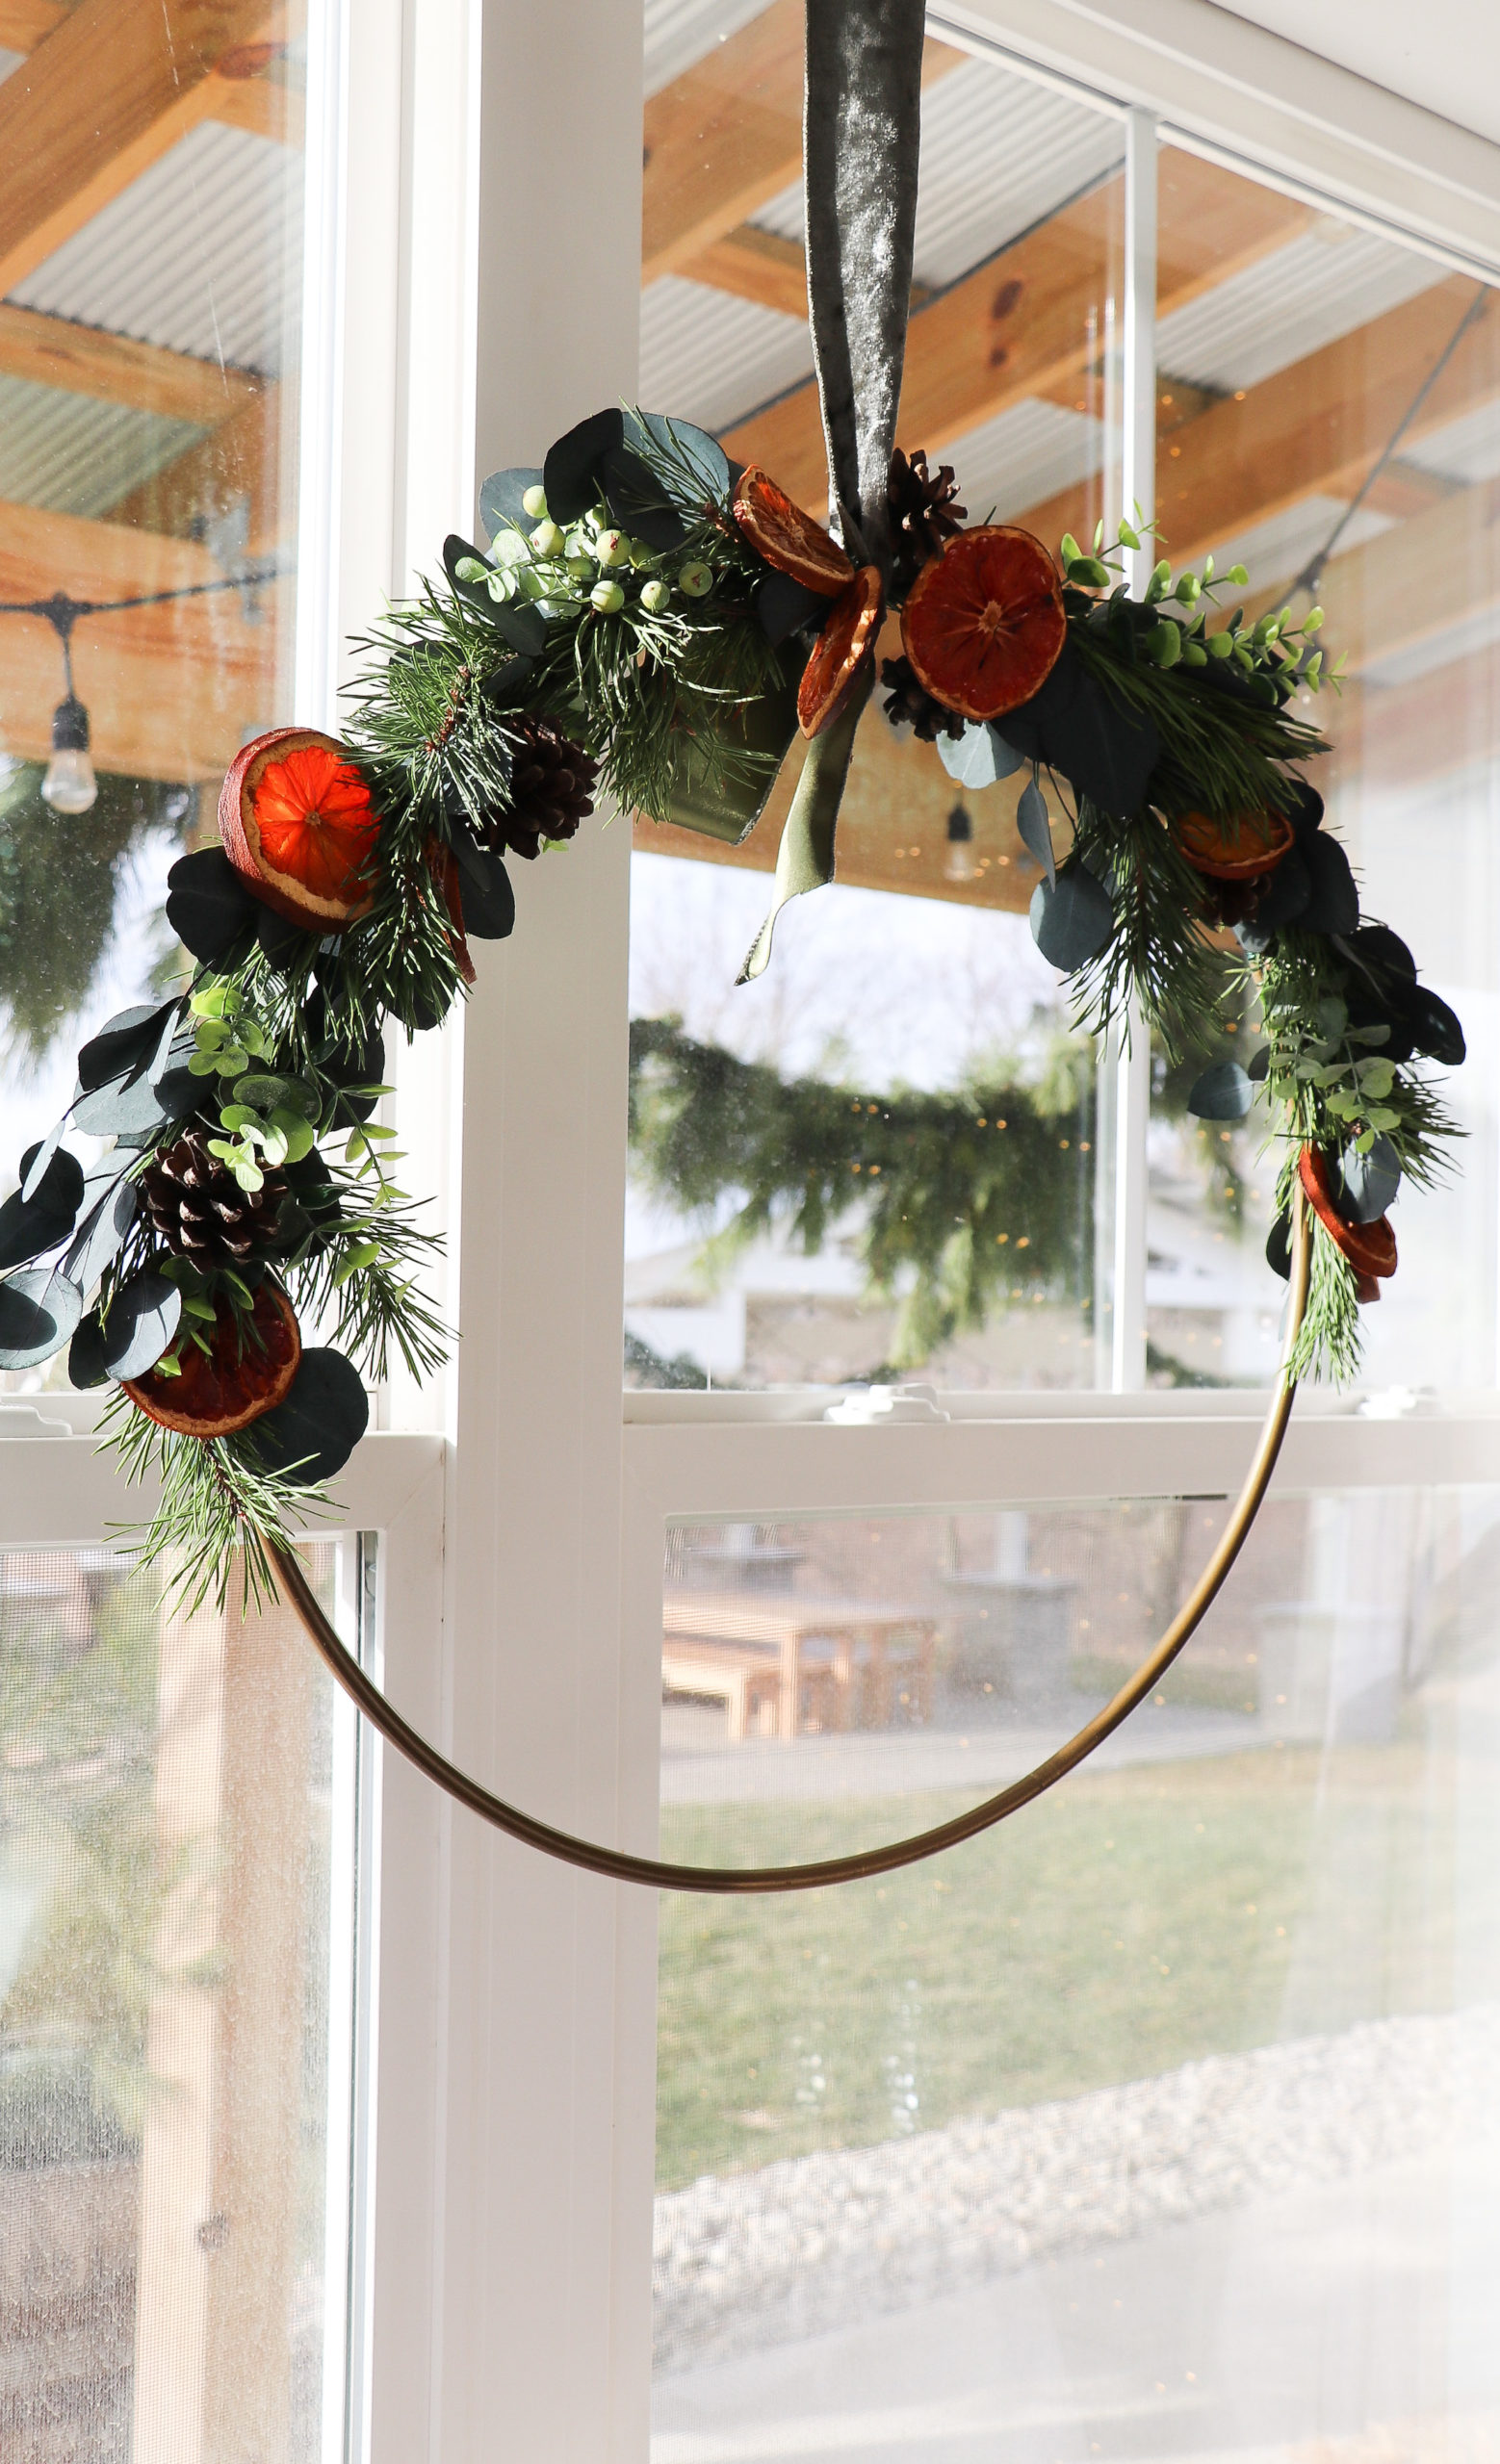 how to decorate and make a dried orange hoop wreath